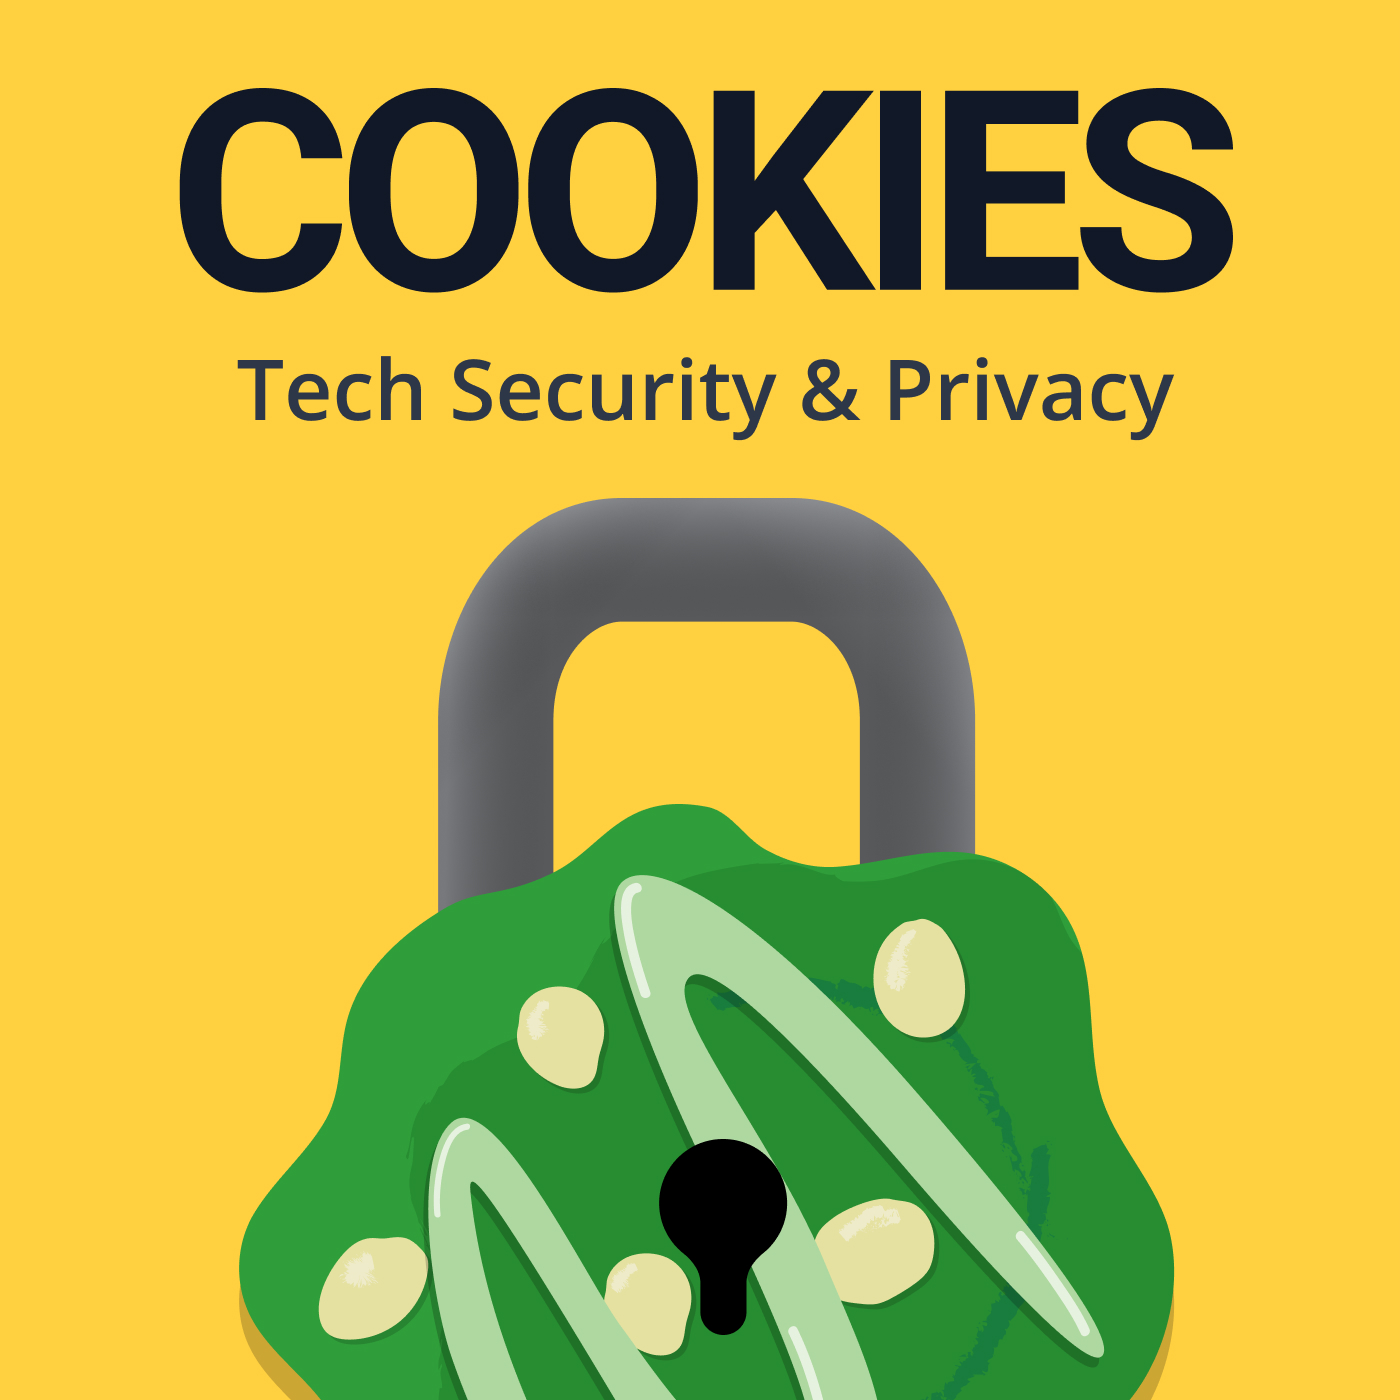 Welcome to Cookies: Tech Security & Privacy!